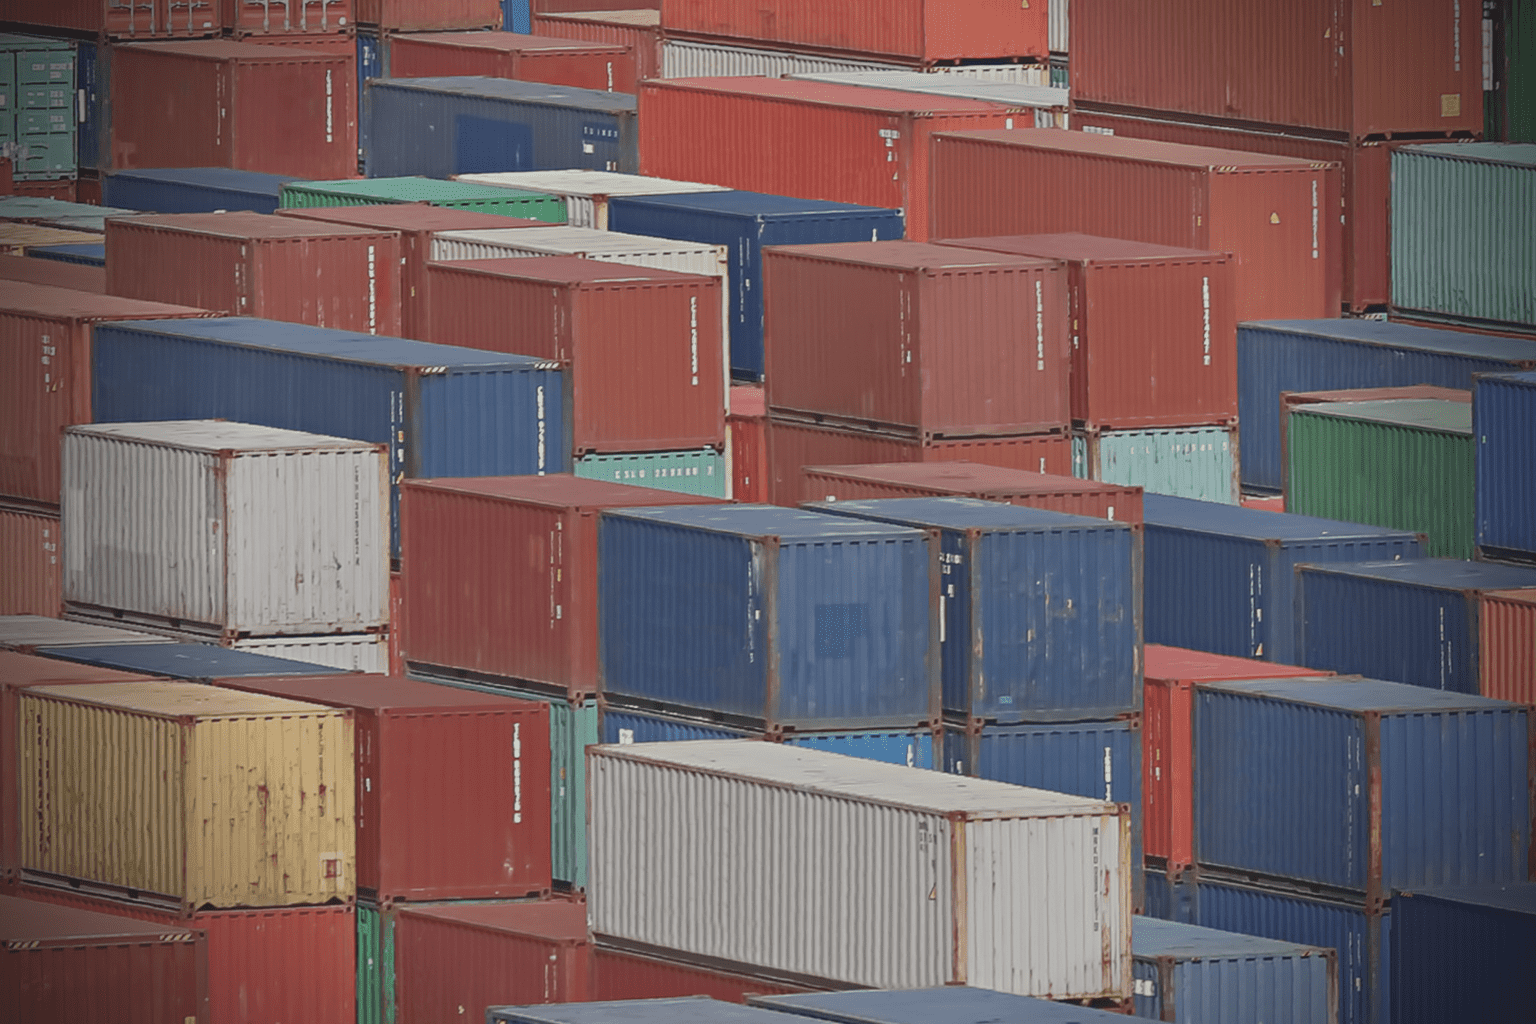 What was used before shipping containers?